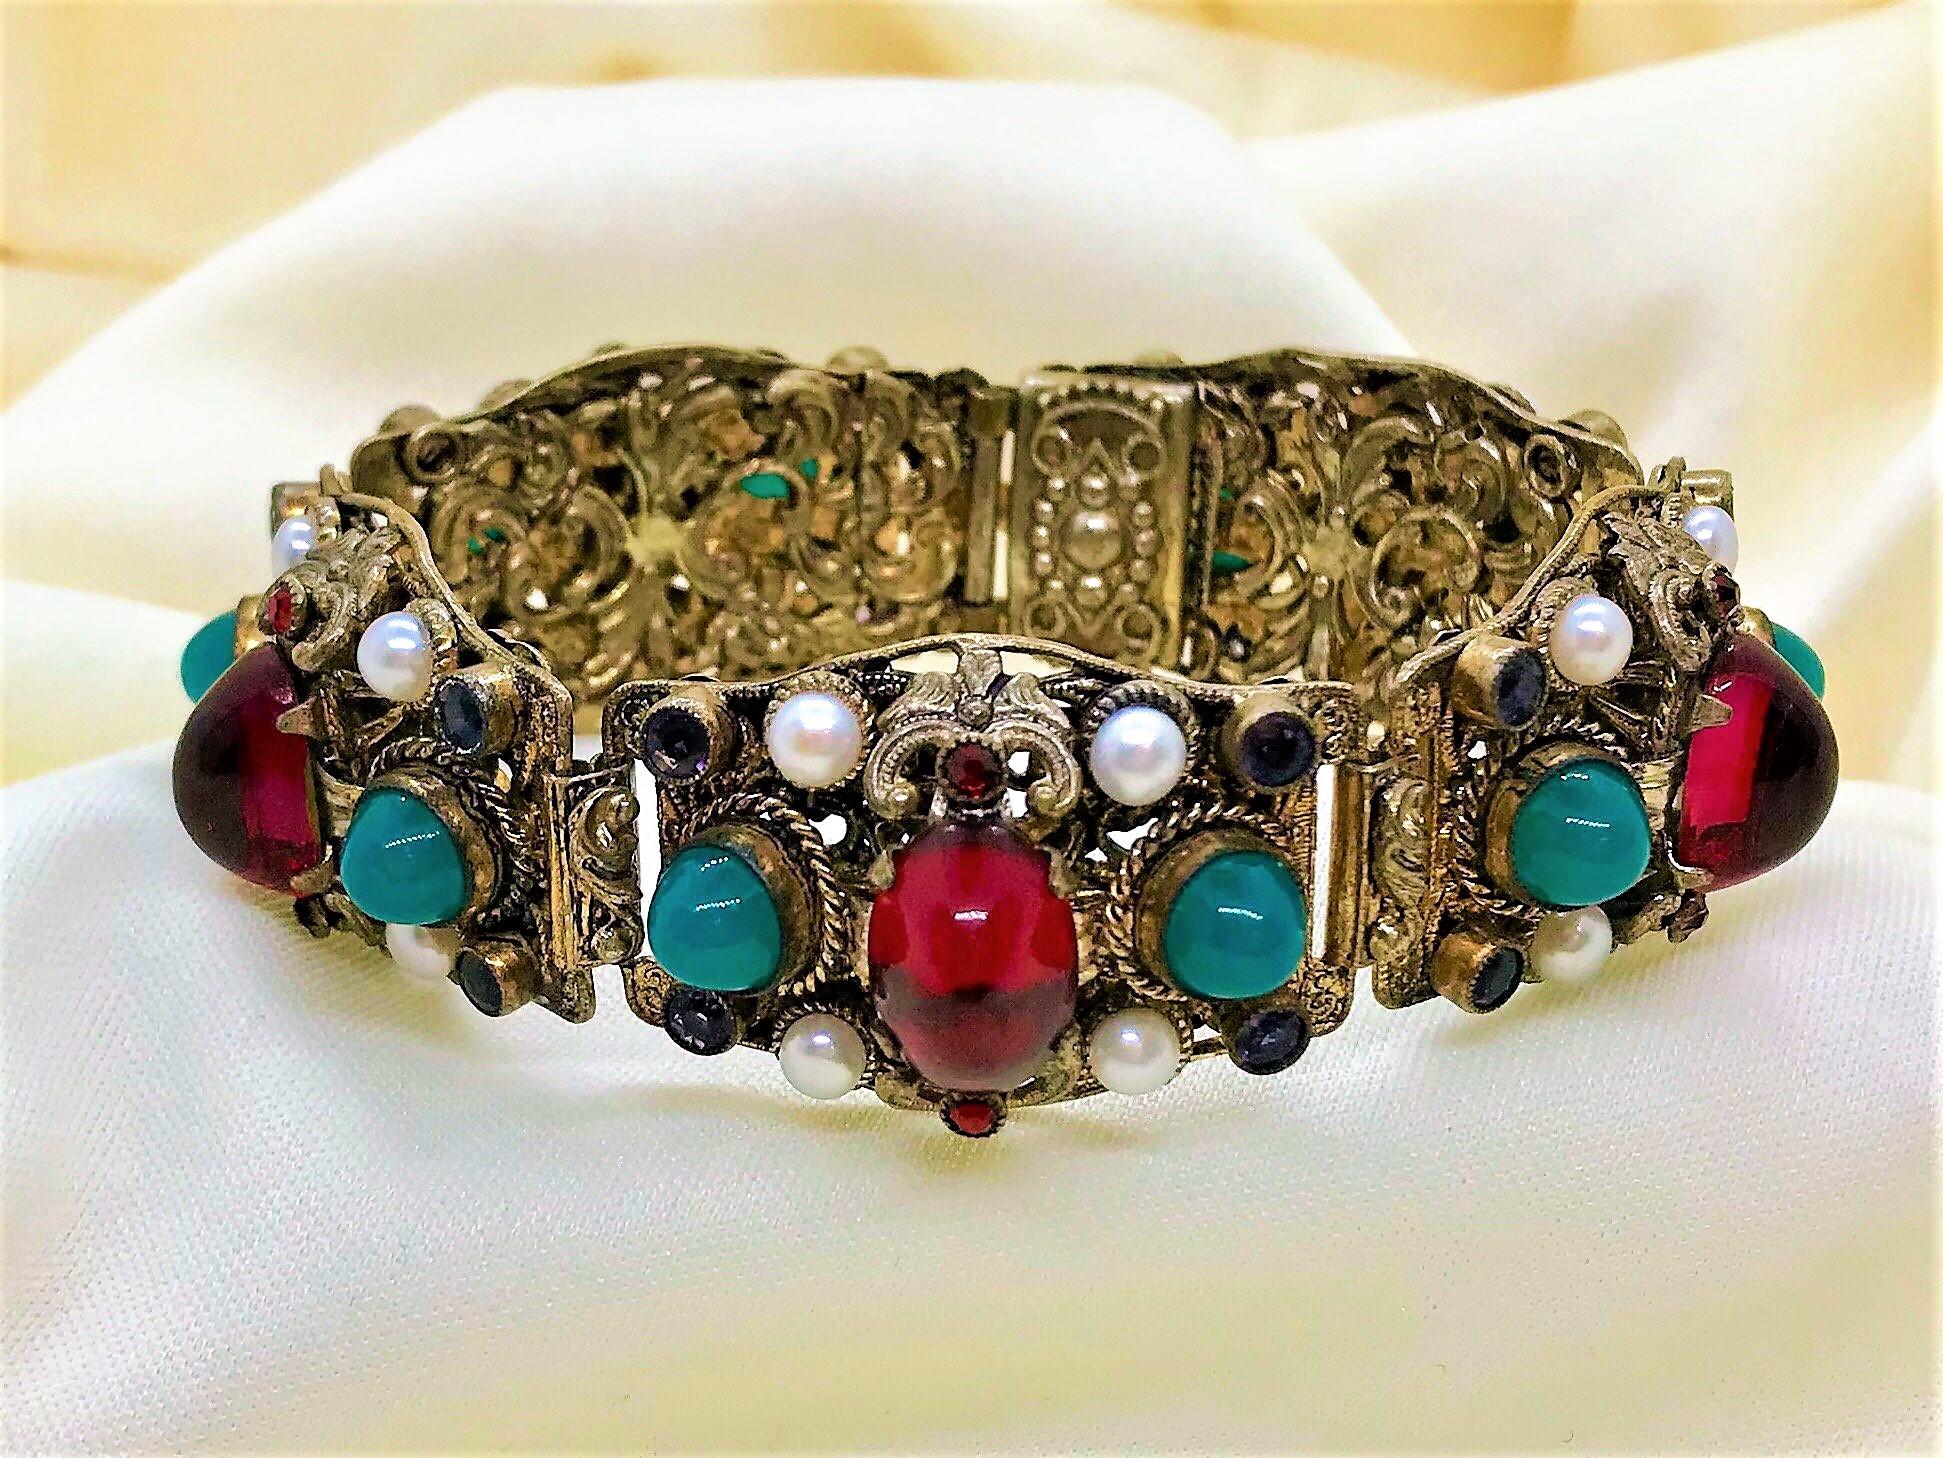 Circa 1940s to 1950s ornately designed, Austro Hungarian style, gold tone metal bracelet.  It is bezel and prong set with cultured pearls, ruby red and jade green glass cabochons as well as purple faceted glass stones.  The bracelet is 7.12